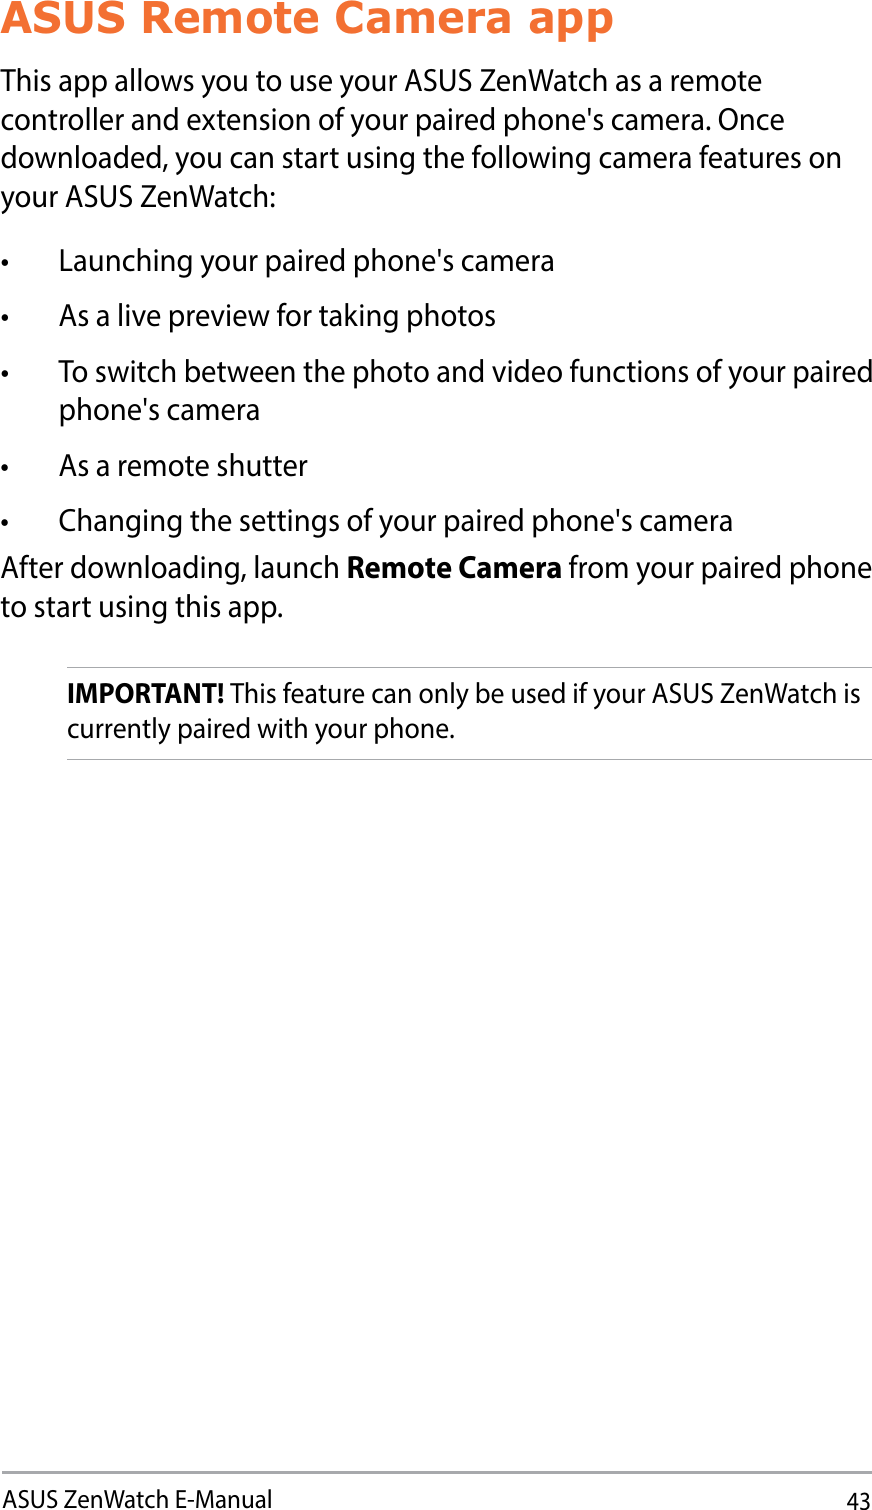 43ASUS ZenWatch E-ManualASUS Remote Camera appThis app allows you to use your ASUS ZenWatch as a remote controller and extension of your paired phone&apos;s camera. Once downloaded, you can start using the following camera features on your ASUS ZenWatch:t -BVODIJOHZPVSQBJSFEQIPOFhTDBNFSBt &quot;TBMJWFQSFWJFXGPSUBLJOHQIPUPTt 5PTXJUDICFUXFFOUIFQIPUPBOEWJEFPGVODUJPOTPGZPVSQBJSFEphone&apos;s camerat &quot;TBSFNPUFTIVUUFSt $IBOHJOHUIFTFUUJOHTPGZPVSQBJSFEQIPOFhTDBNFSBAfter downloading, launch Remote Camera from your paired phone to start using this app.IMPORTANT! This feature can only be used if your ASUS ZenWatch is currently paired with your phone.